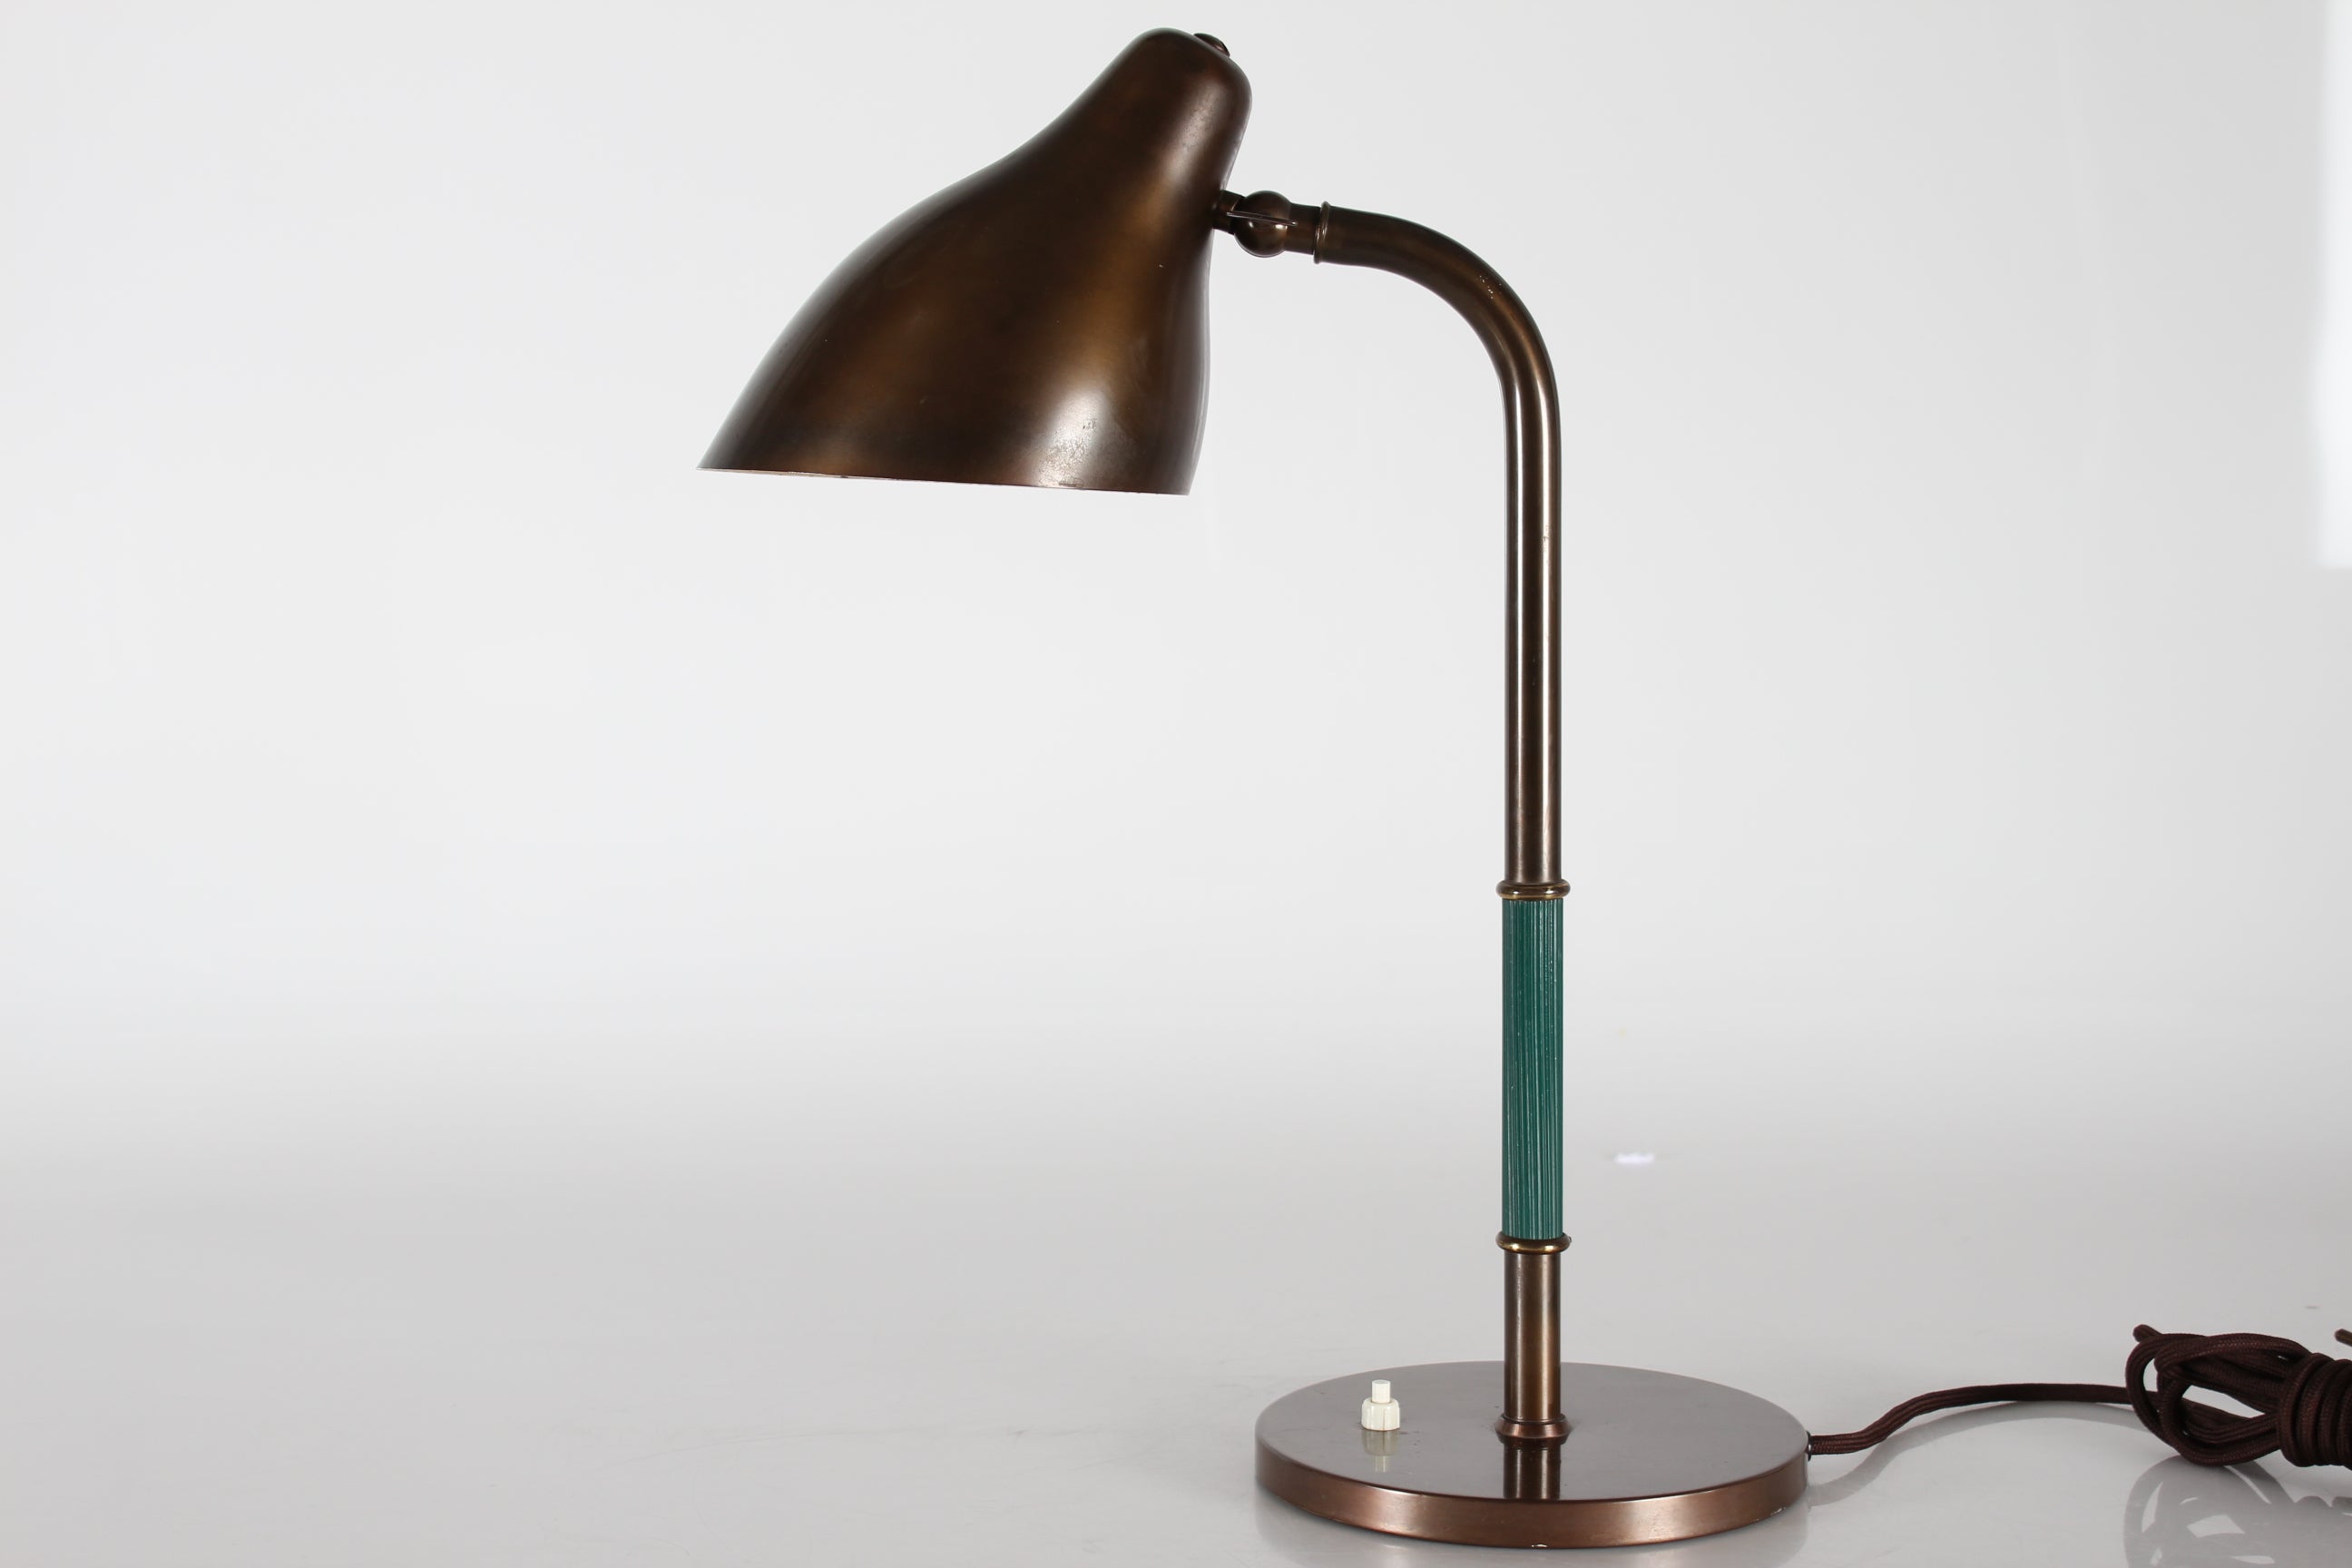 Vintage desk lamp model B 187 by the Danish architect Vilhelm Lauritzen (1894-1984)  manufactured by Lyfa in the 1940s.

Vilhelm Lauritzen was one of the greatest designers in Denmark in the 20th.
He was a functionalist and designed buildings, lamps